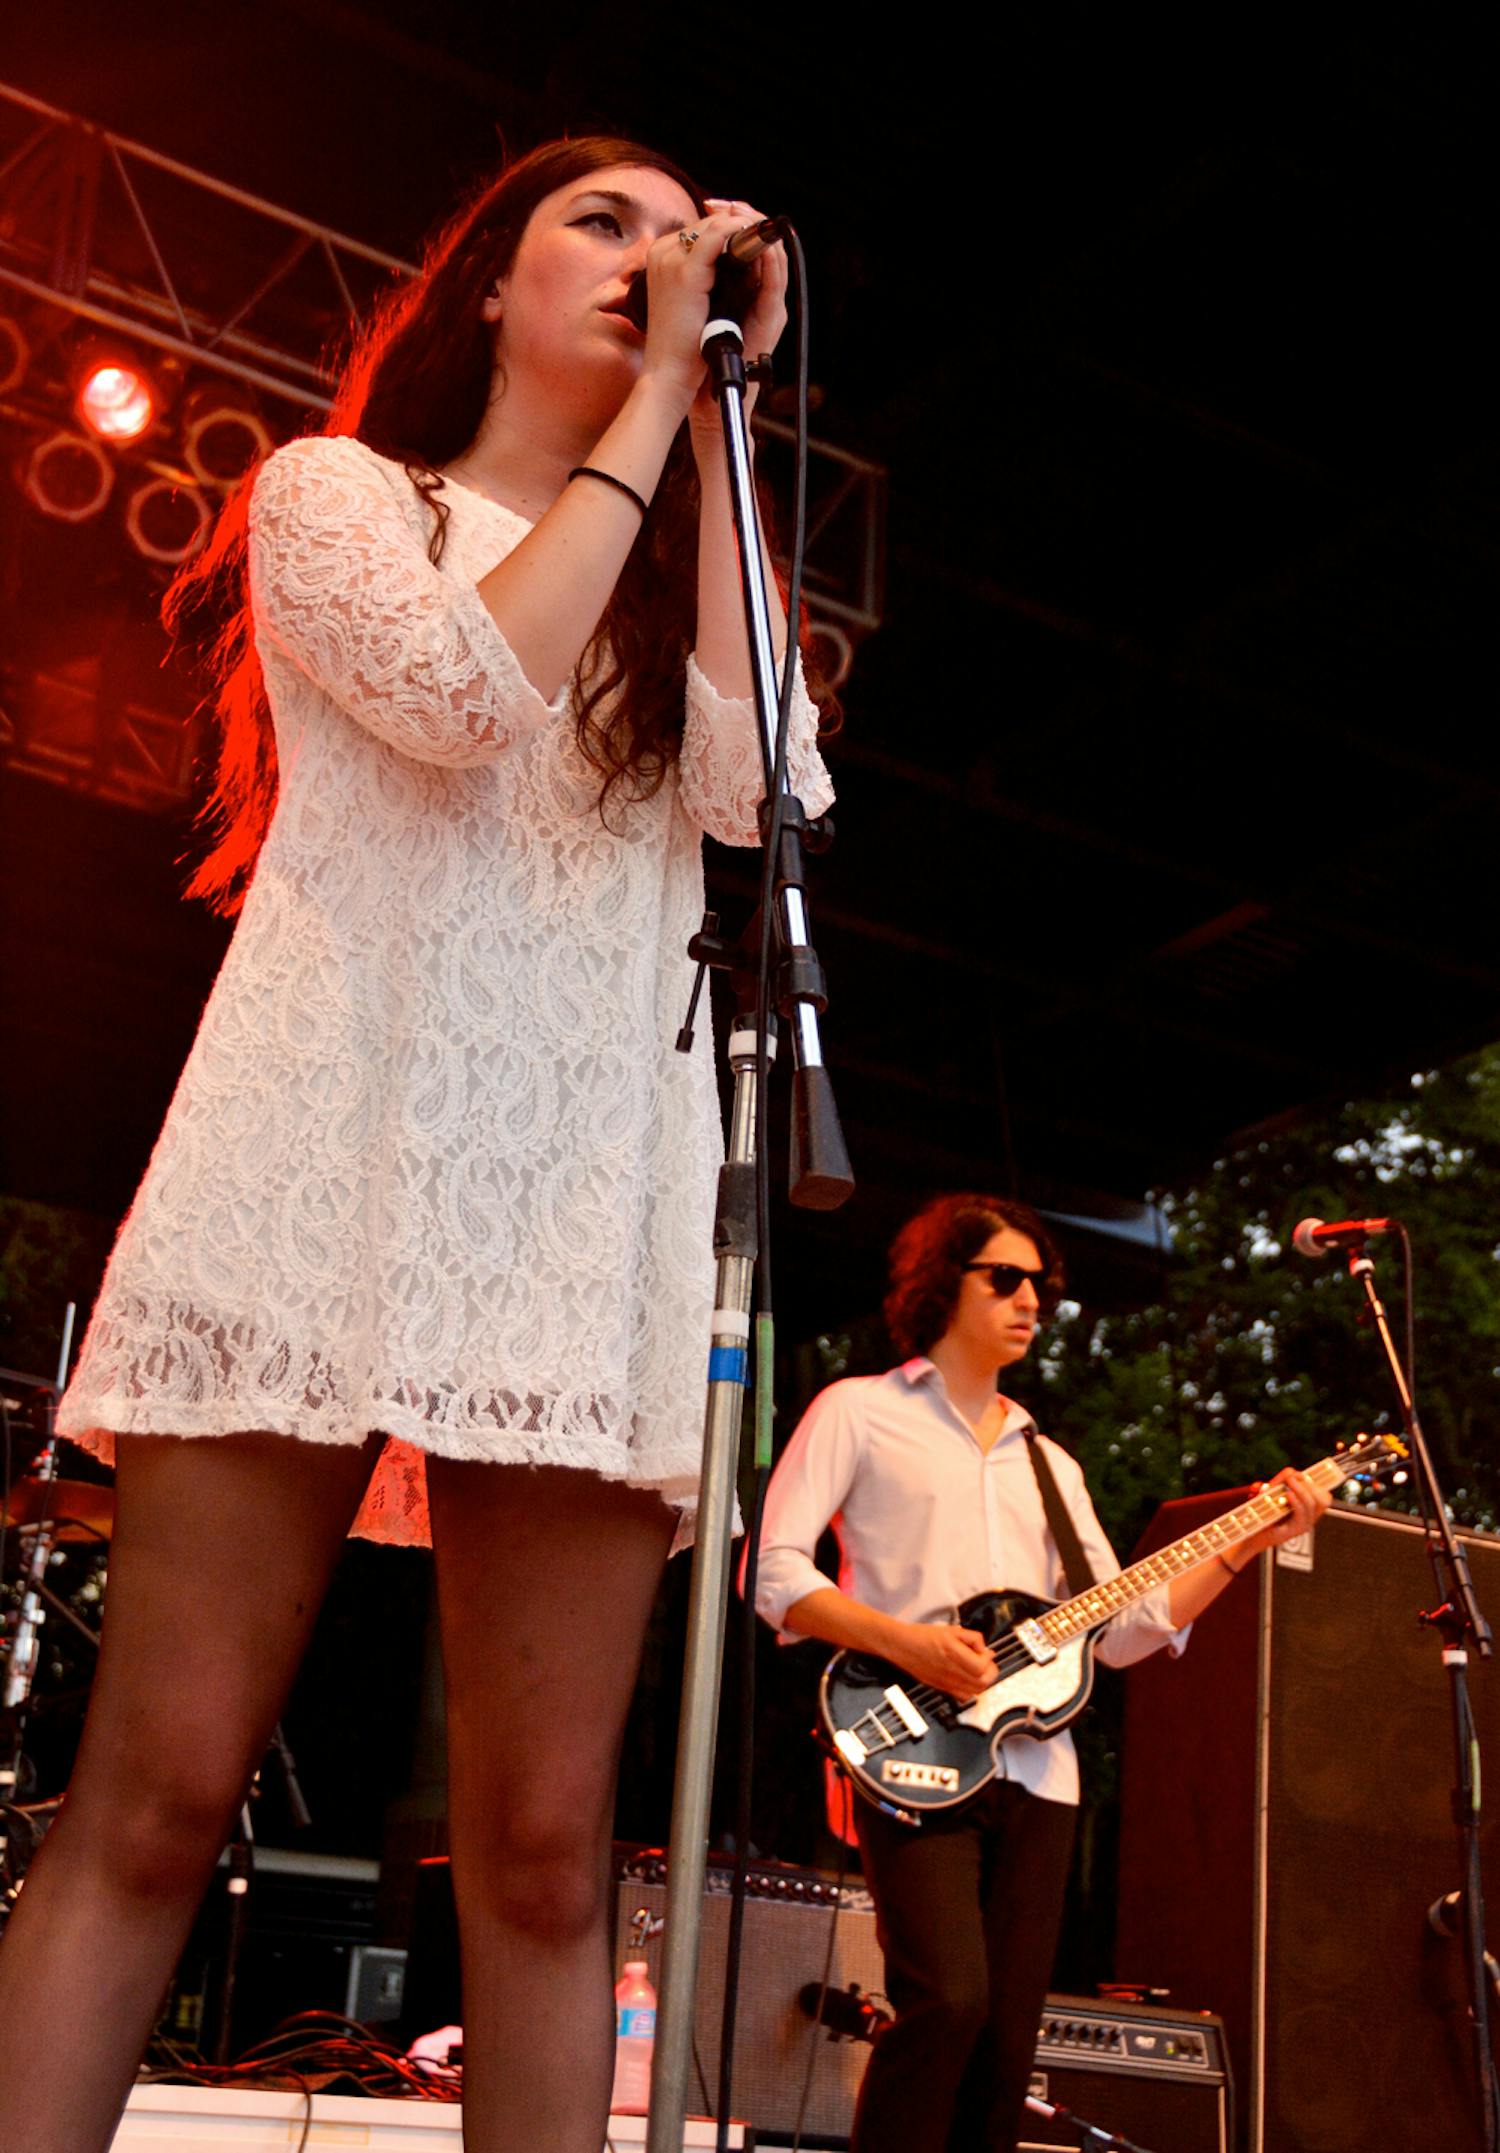 Madeline Follin (left), of Cults, sings on Friday during Swampfest 2013. Cults opened, along with the band AHMIR, for Matt and Kim, whose performance was canceled due to thunderstorms.